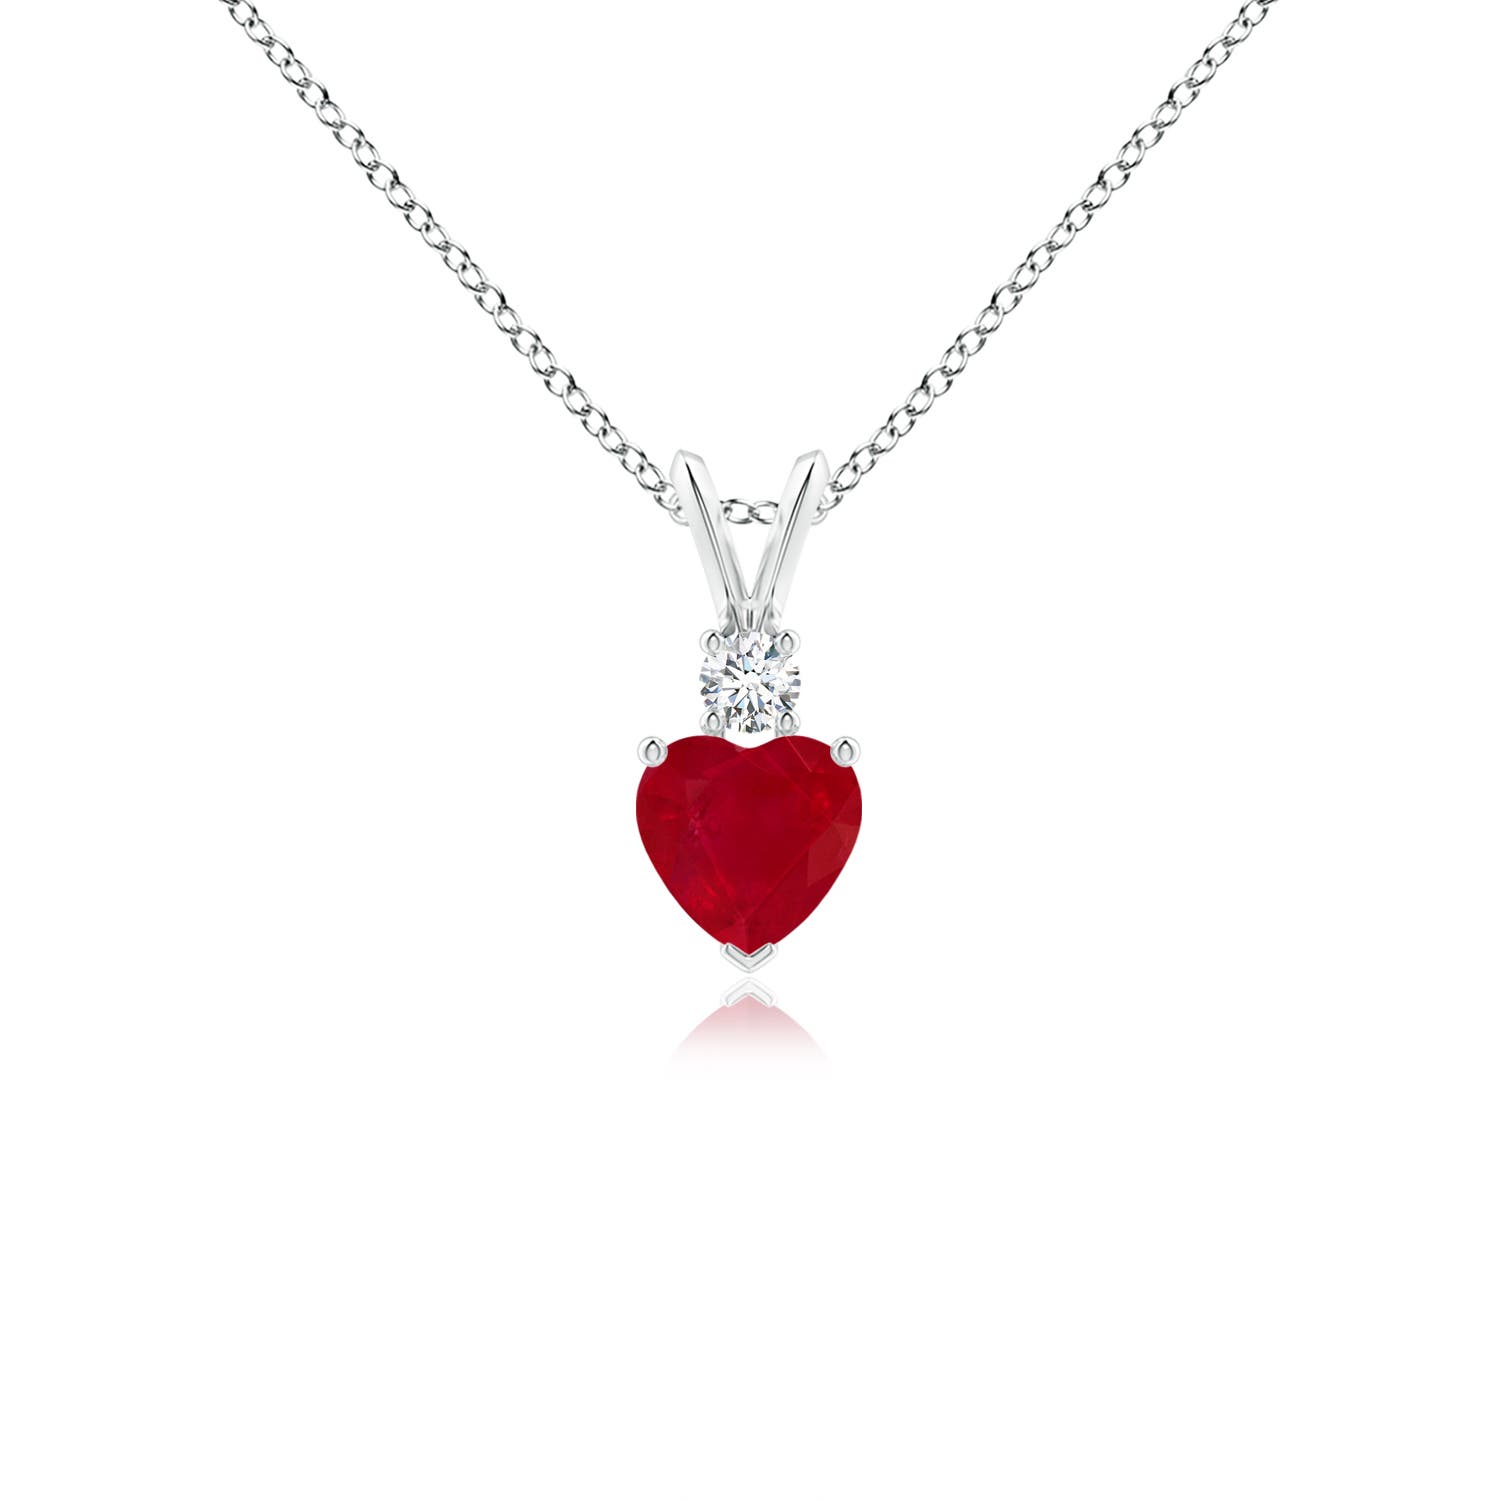 AA - Ruby / 0.59 CT / 14 KT White Gold